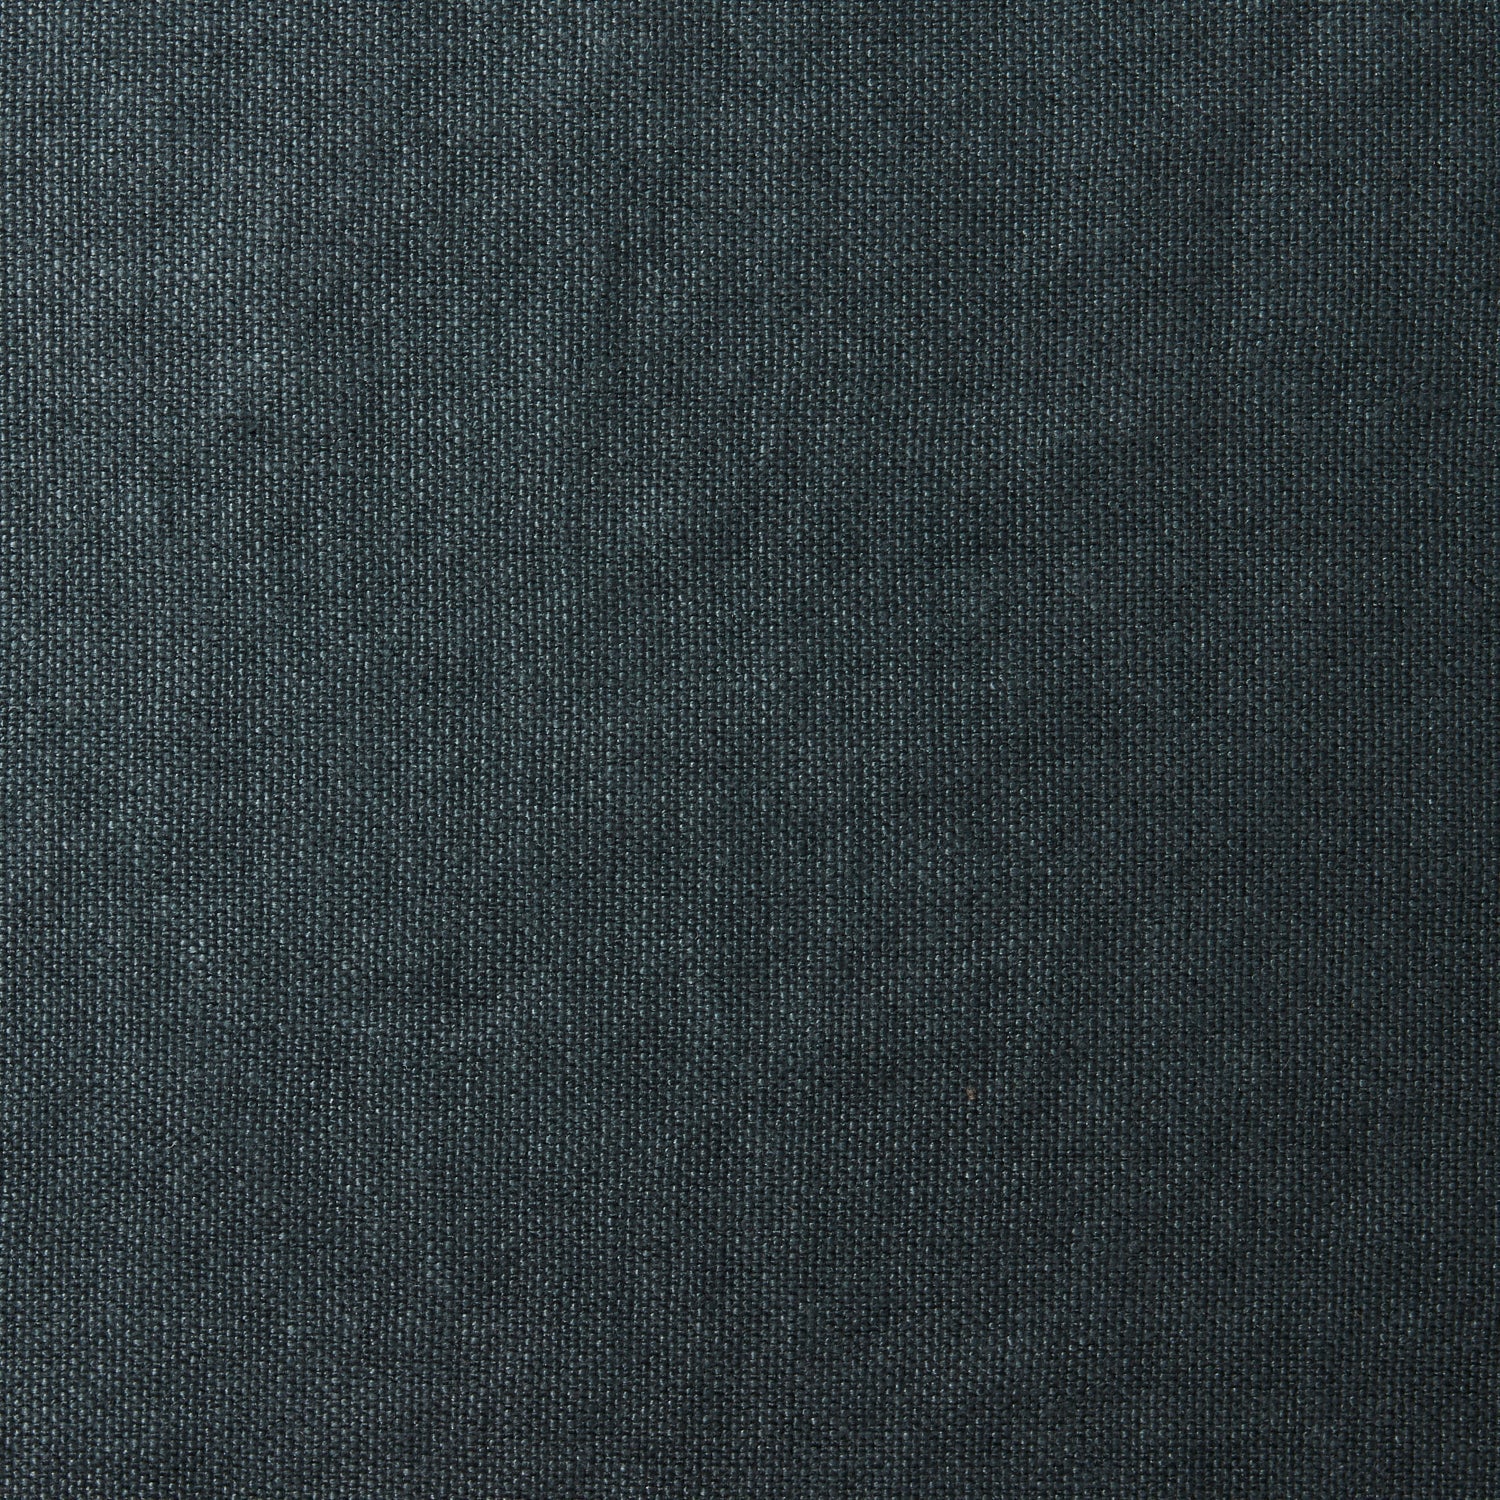 A swatch of old-world linen fabric in a solid dark green-gray color.